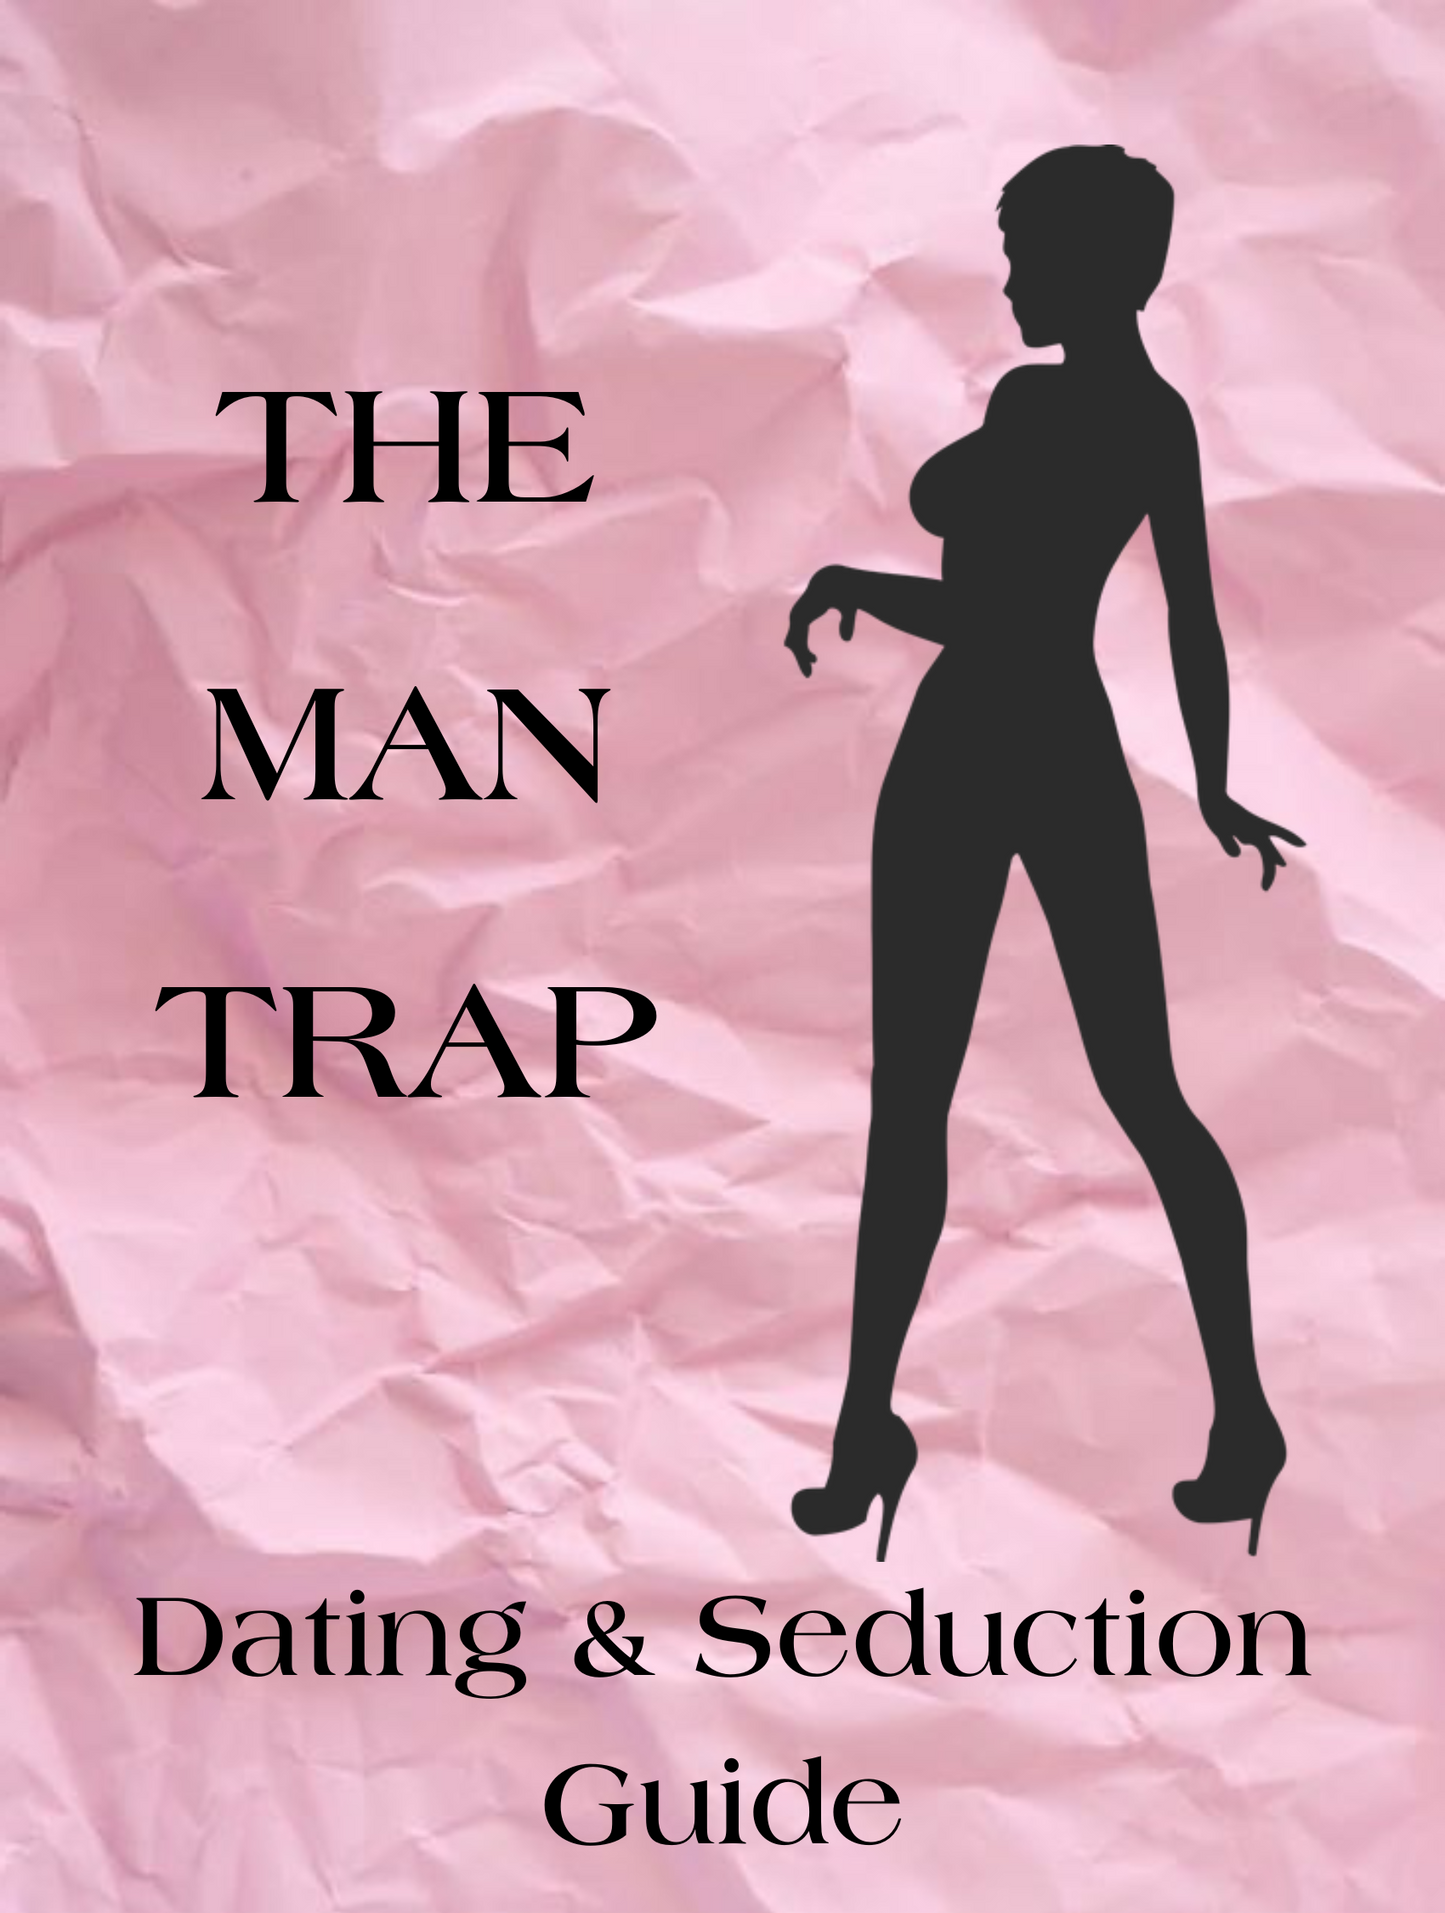 THE MAN TRAP; Dating & Seduction Guide